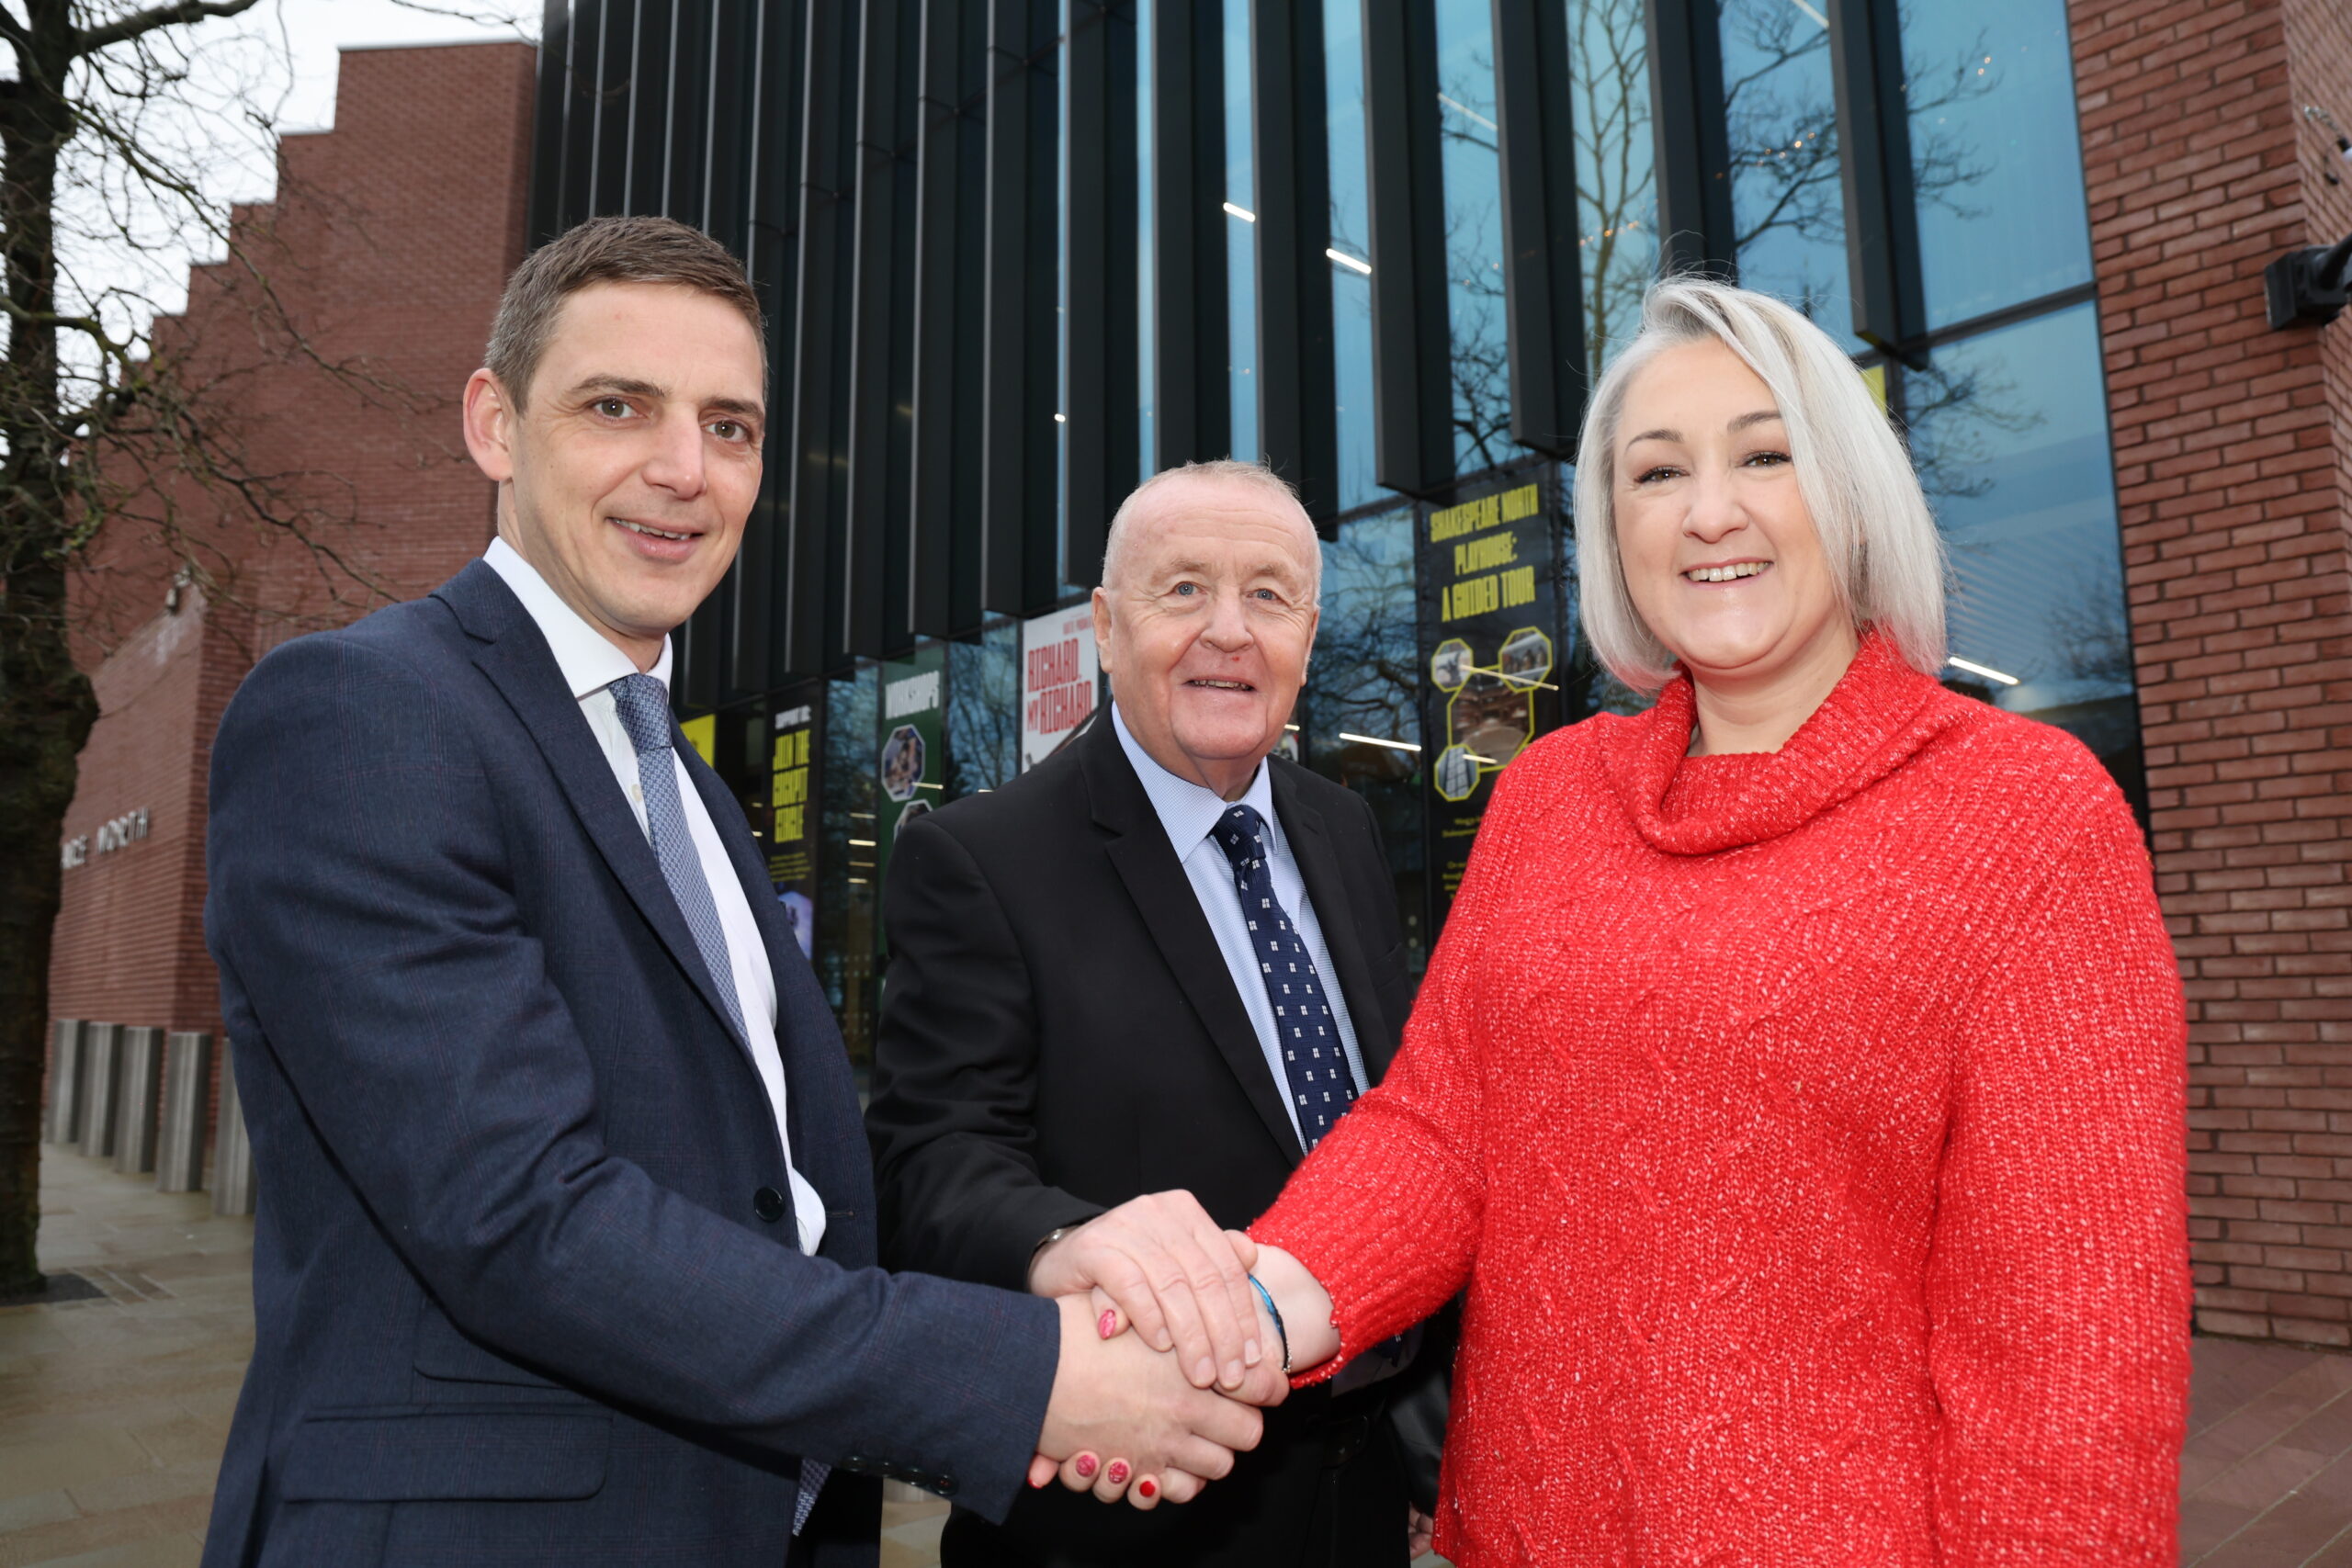 Matt Claxton, Planning Director, Tritax Symmetry); Cllr Tony Brennan, Knowsley’s Cabinet Member for Regeneration and Economic Development and Melanie Lewis, Chief Executive at Shakespeare North Playhouse